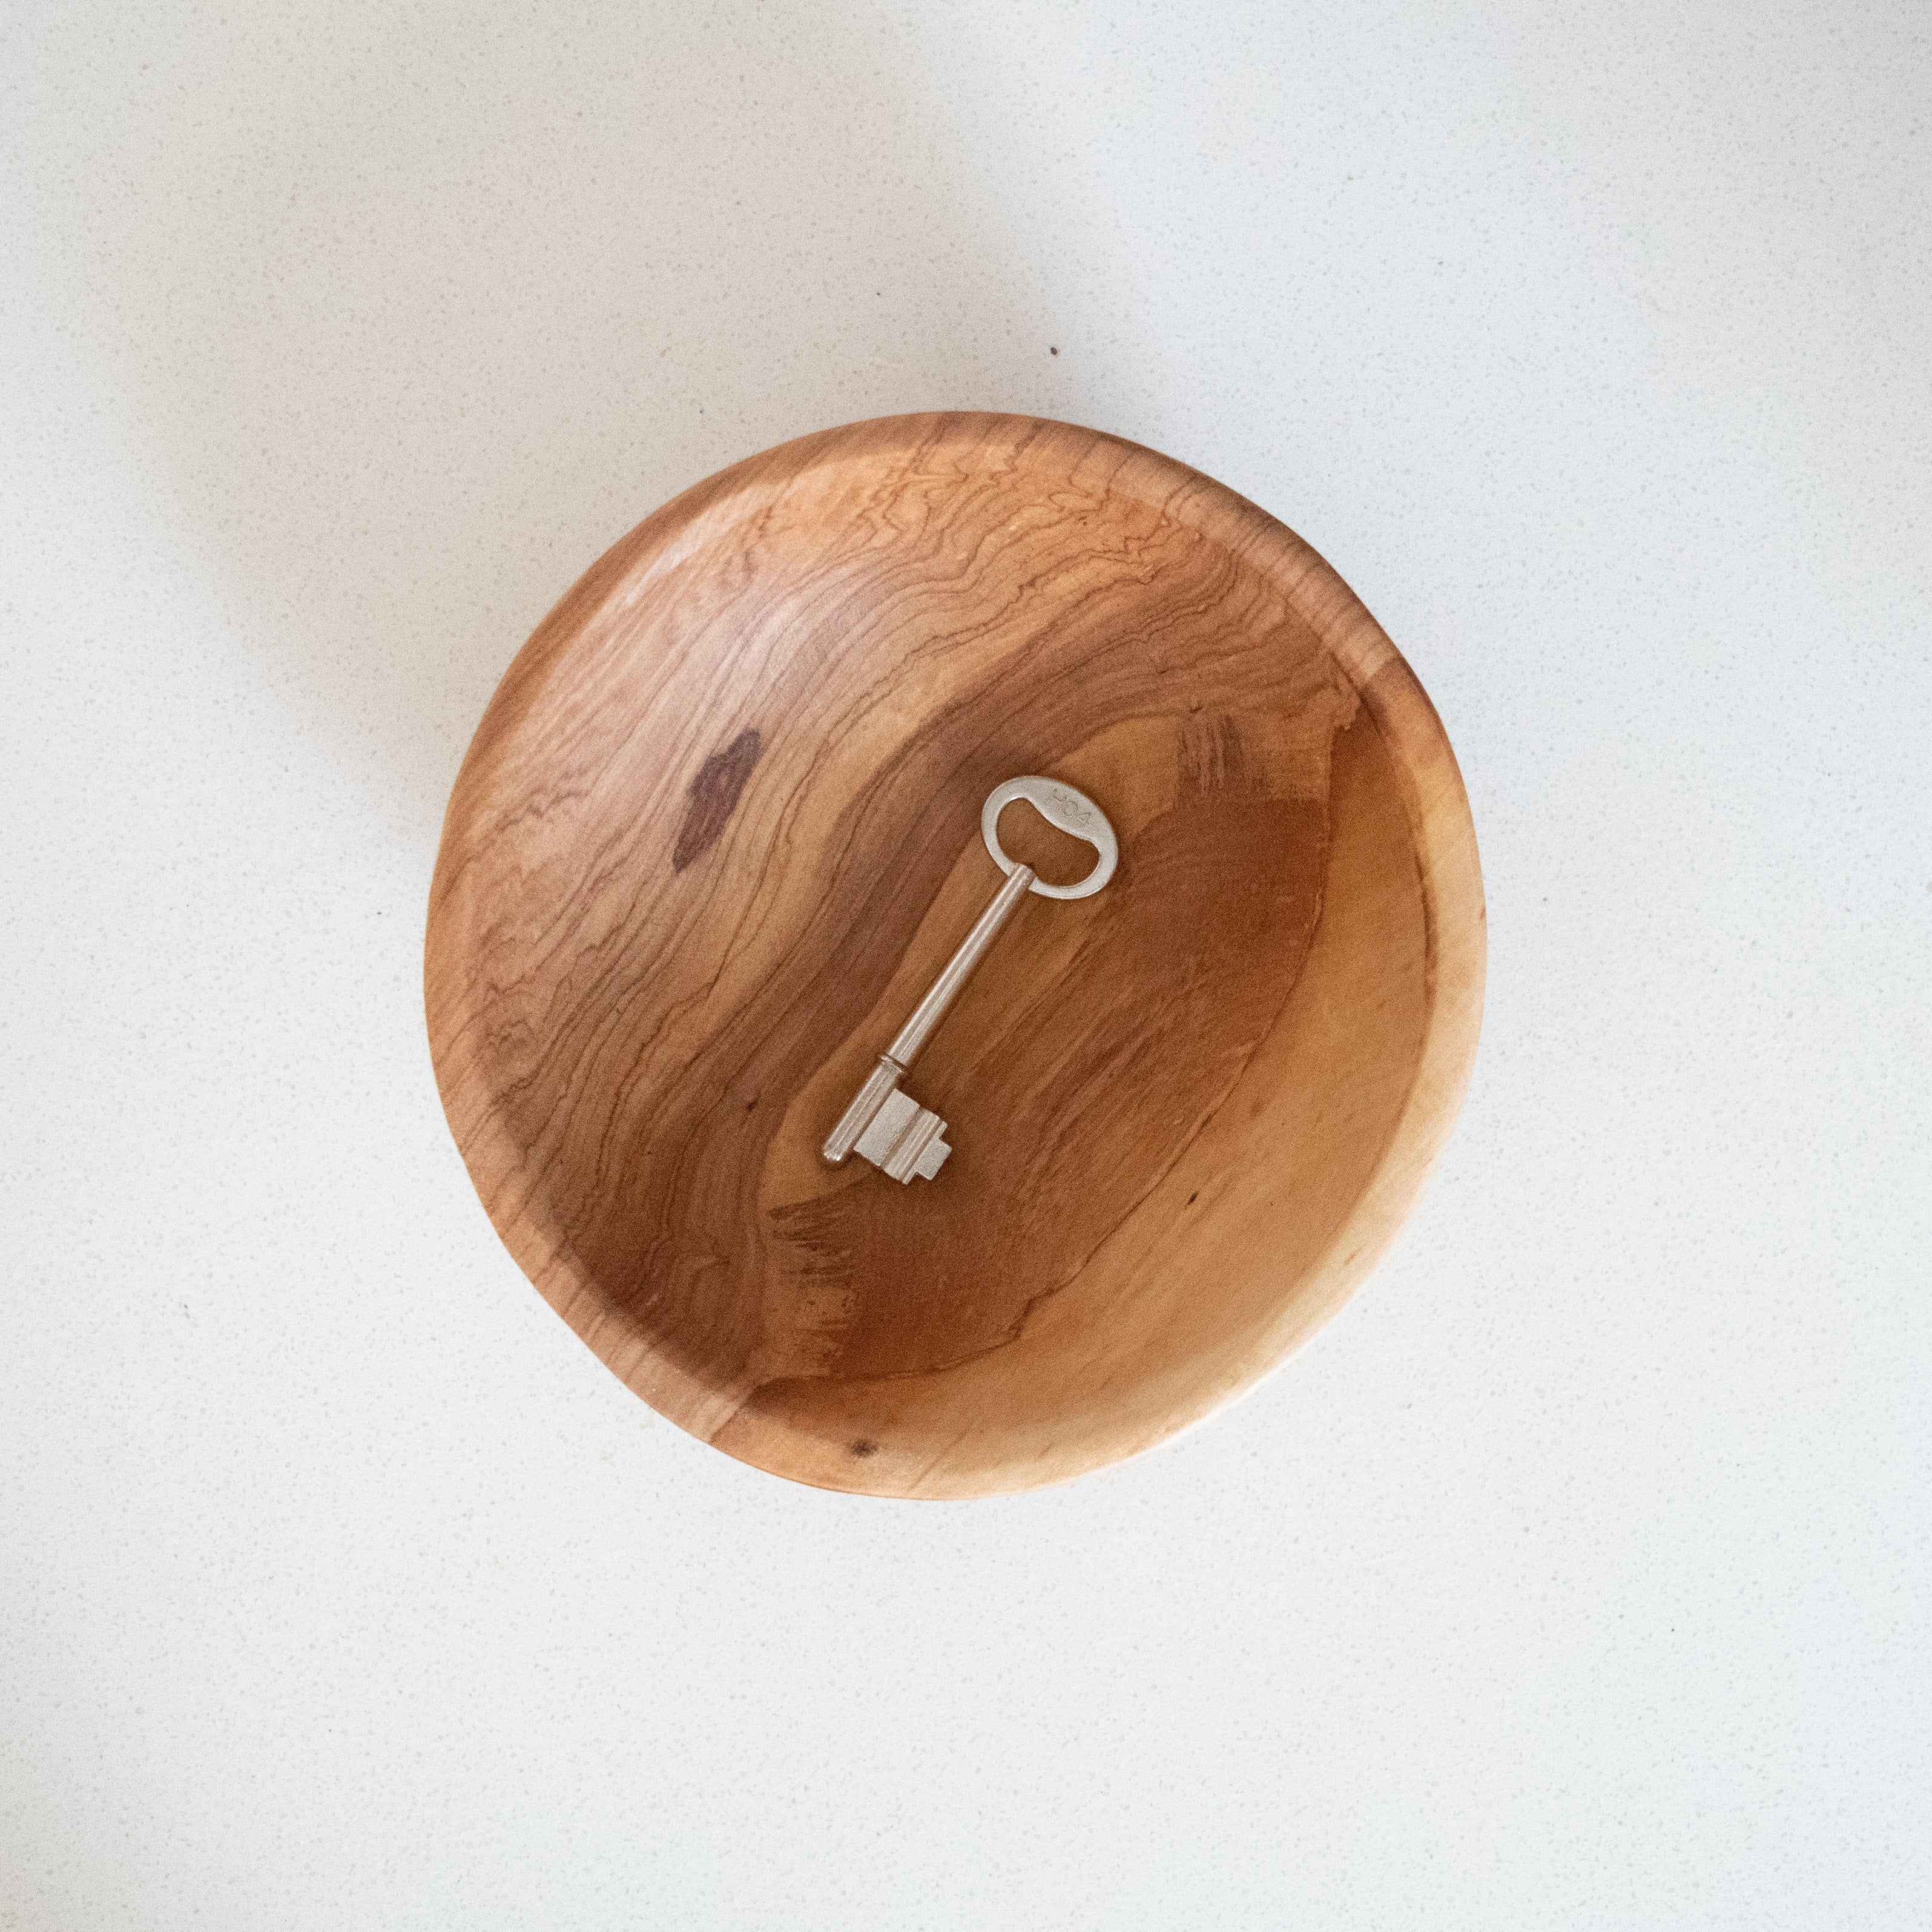 Olivewood Bowl - A handmade Kenyan market artisan product for a Fair Trade boutique